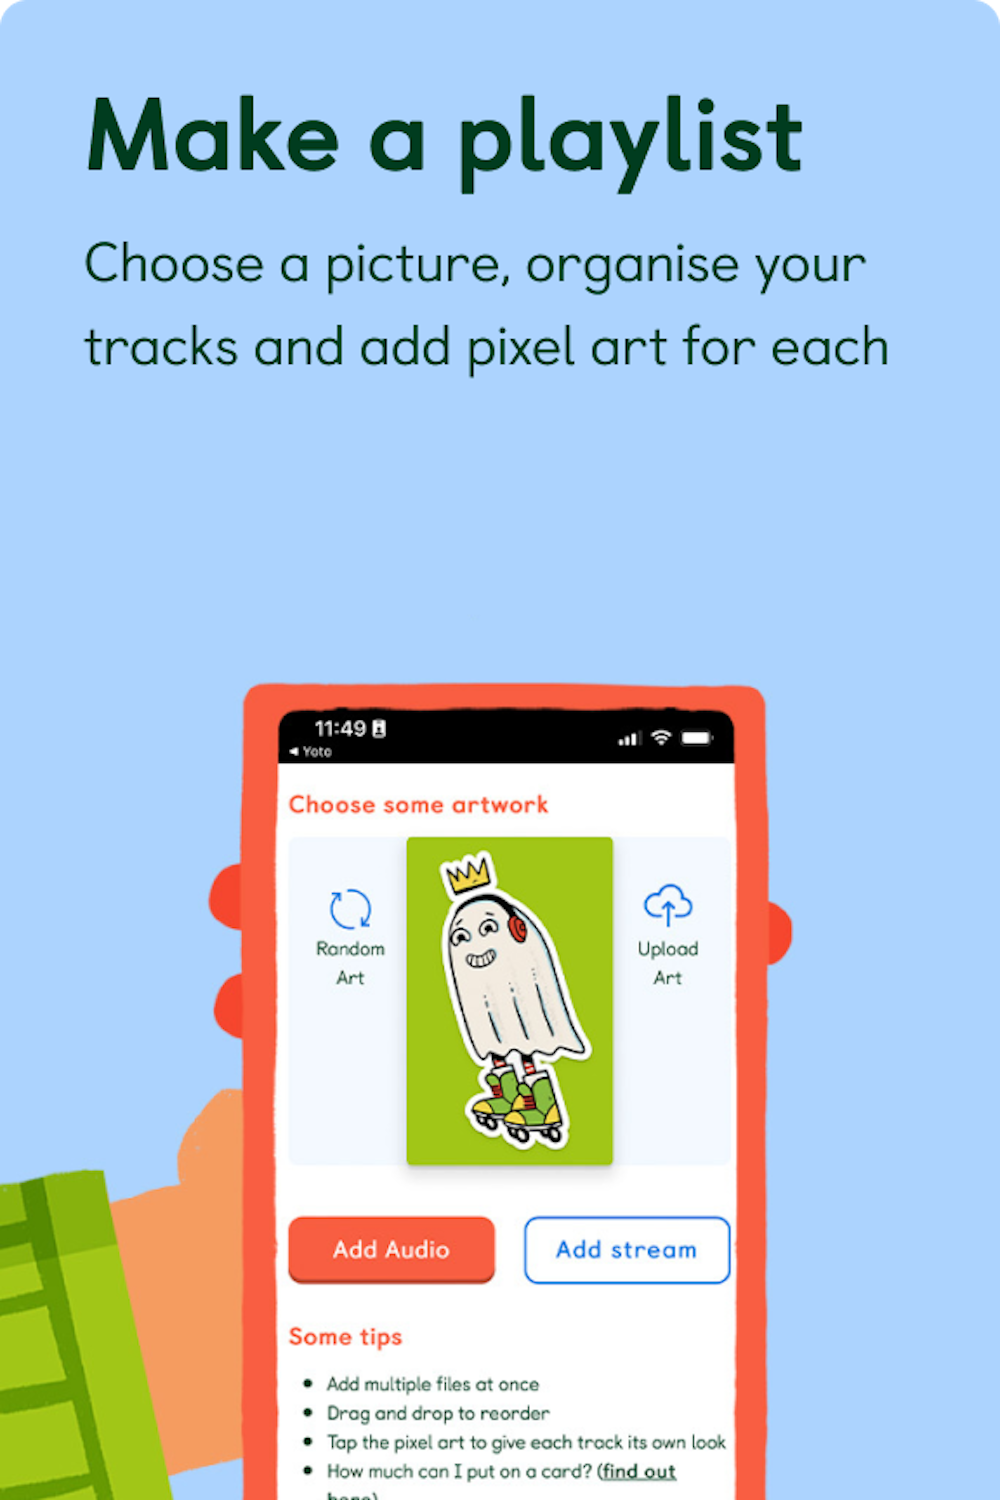 Make a playlist - Choose a picture, organise your tracks and add pixel art for each